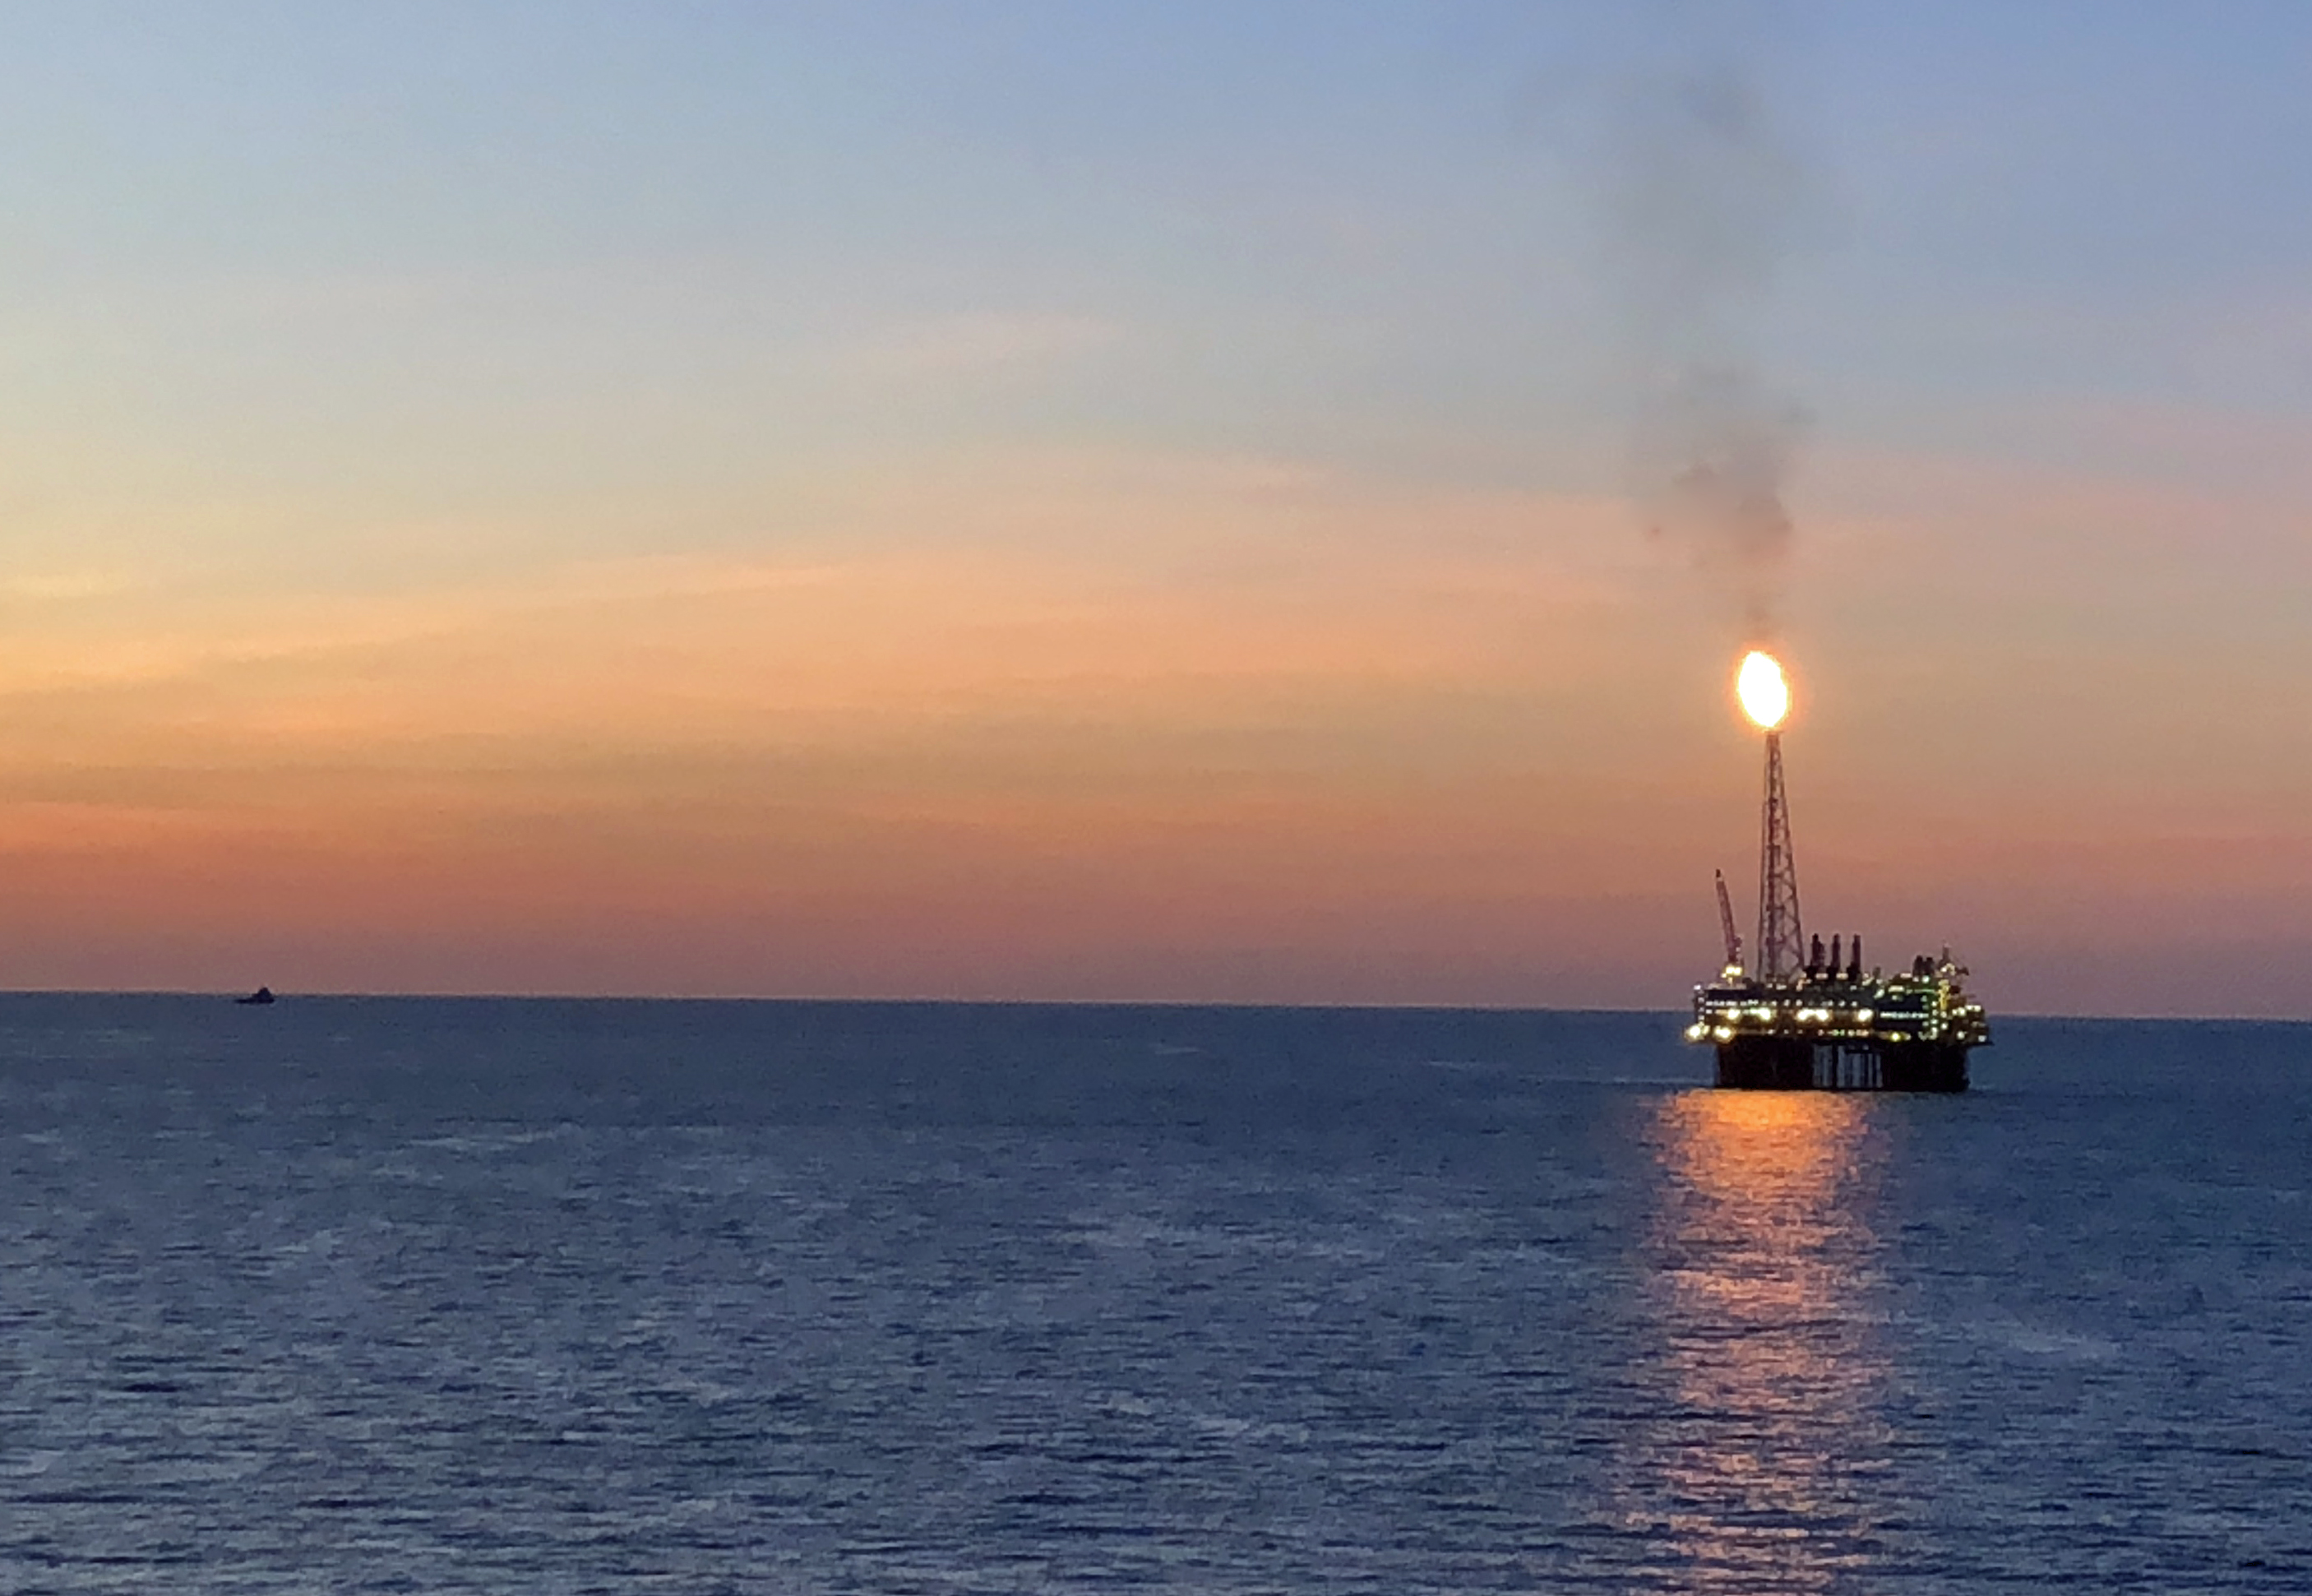 Inpex-led Ichthys LNG starts gas production